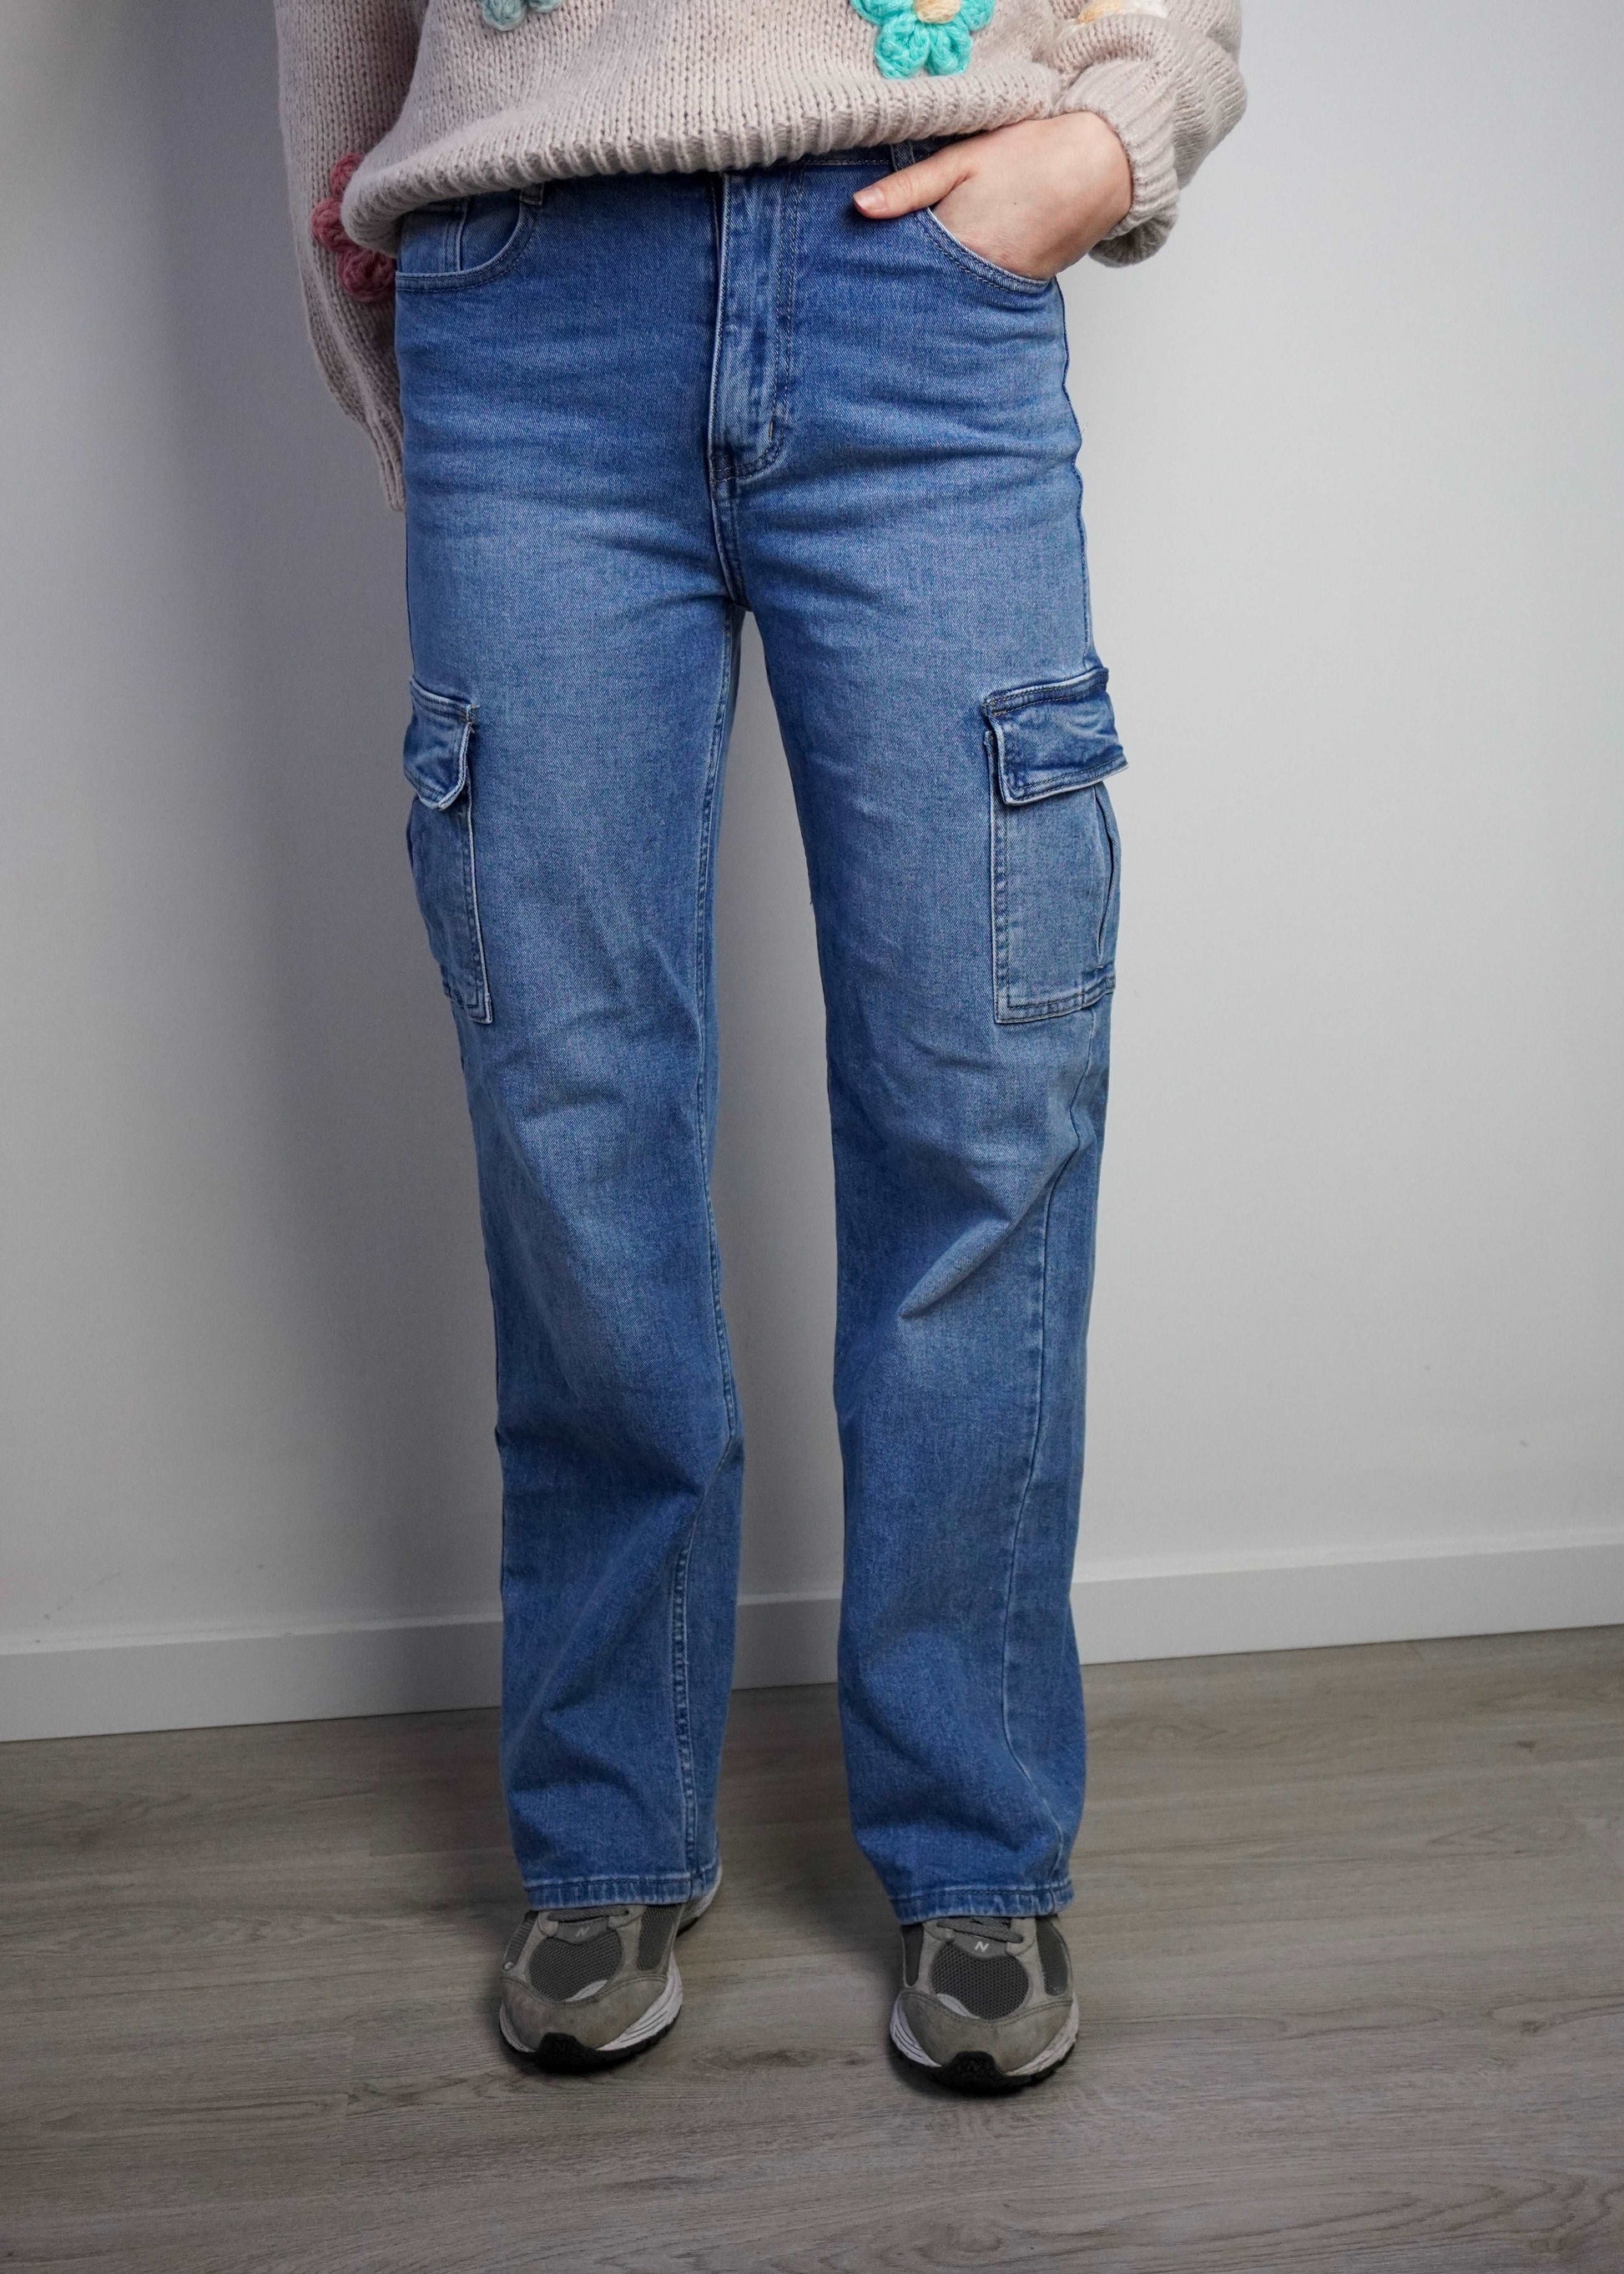 Steffie cargo jeans denim - Styles And More